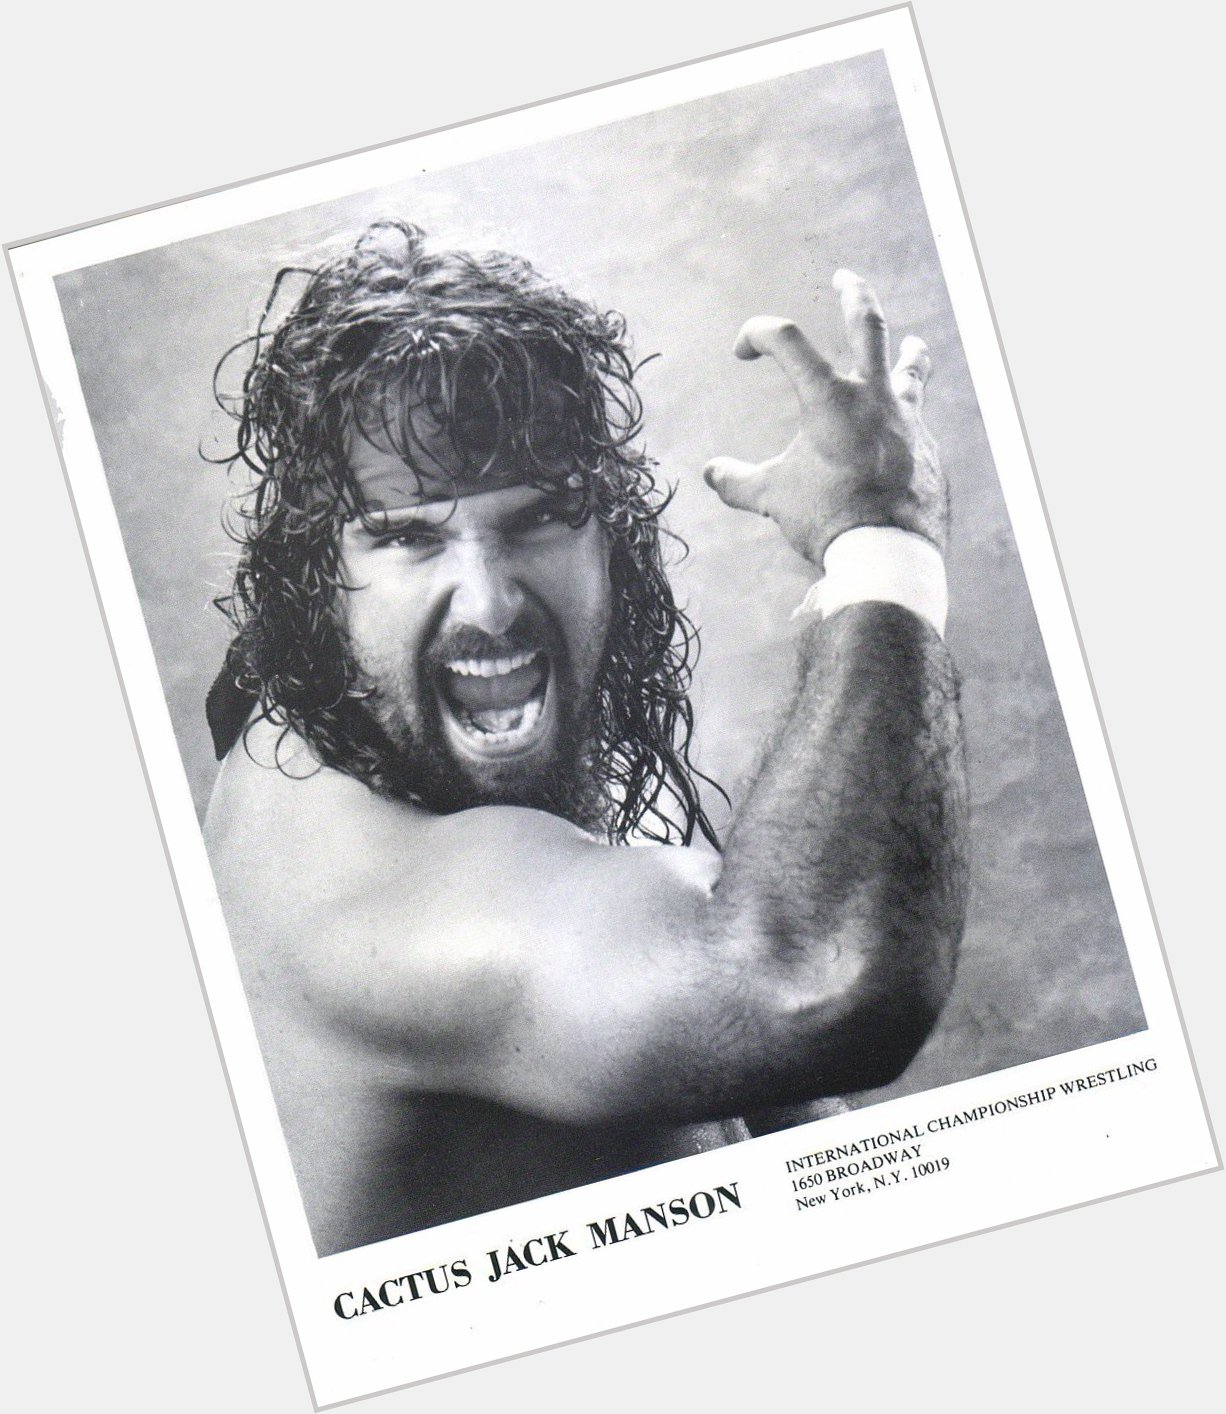 Happy Birthday today to but we remember him from IWCCW as Cactus Jack Manson. Have a nice day! 